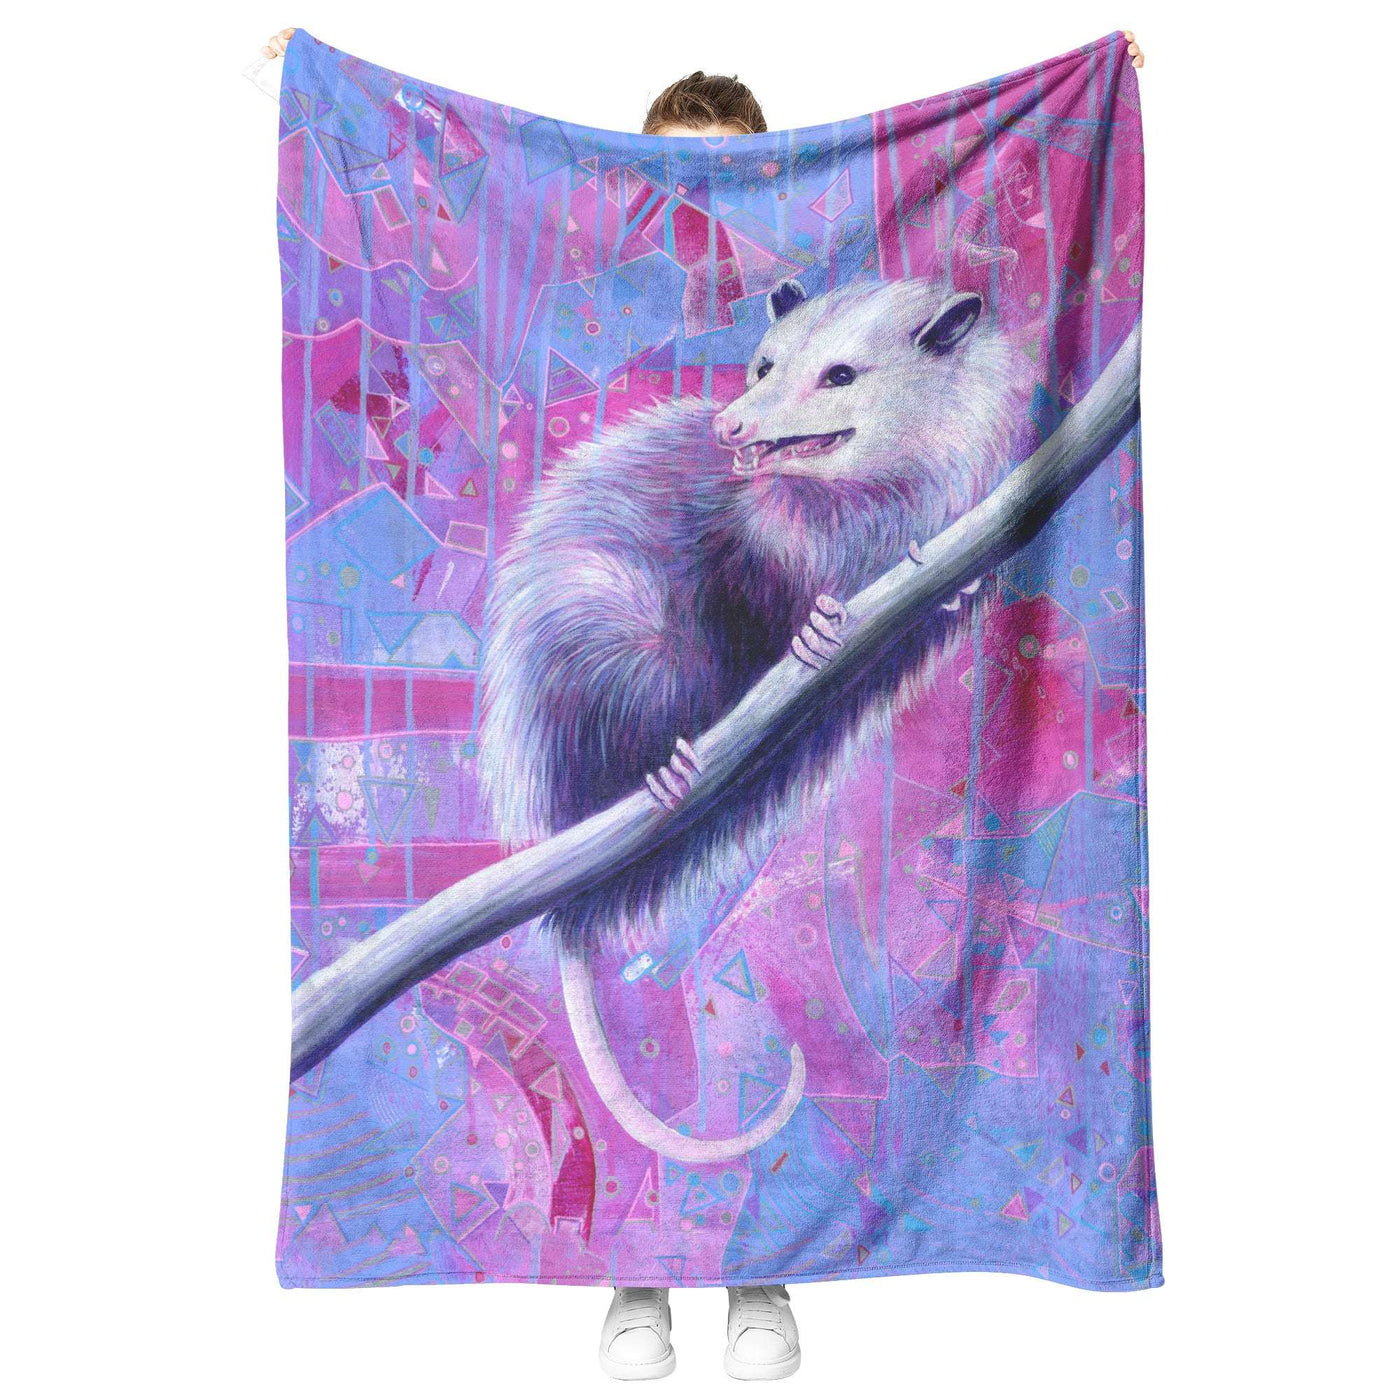 A person stands holding up a large Opossum Blanket featuring a detailed illustration of a white possum on a branch, set against a vibrant, geometric, purple and blue background.